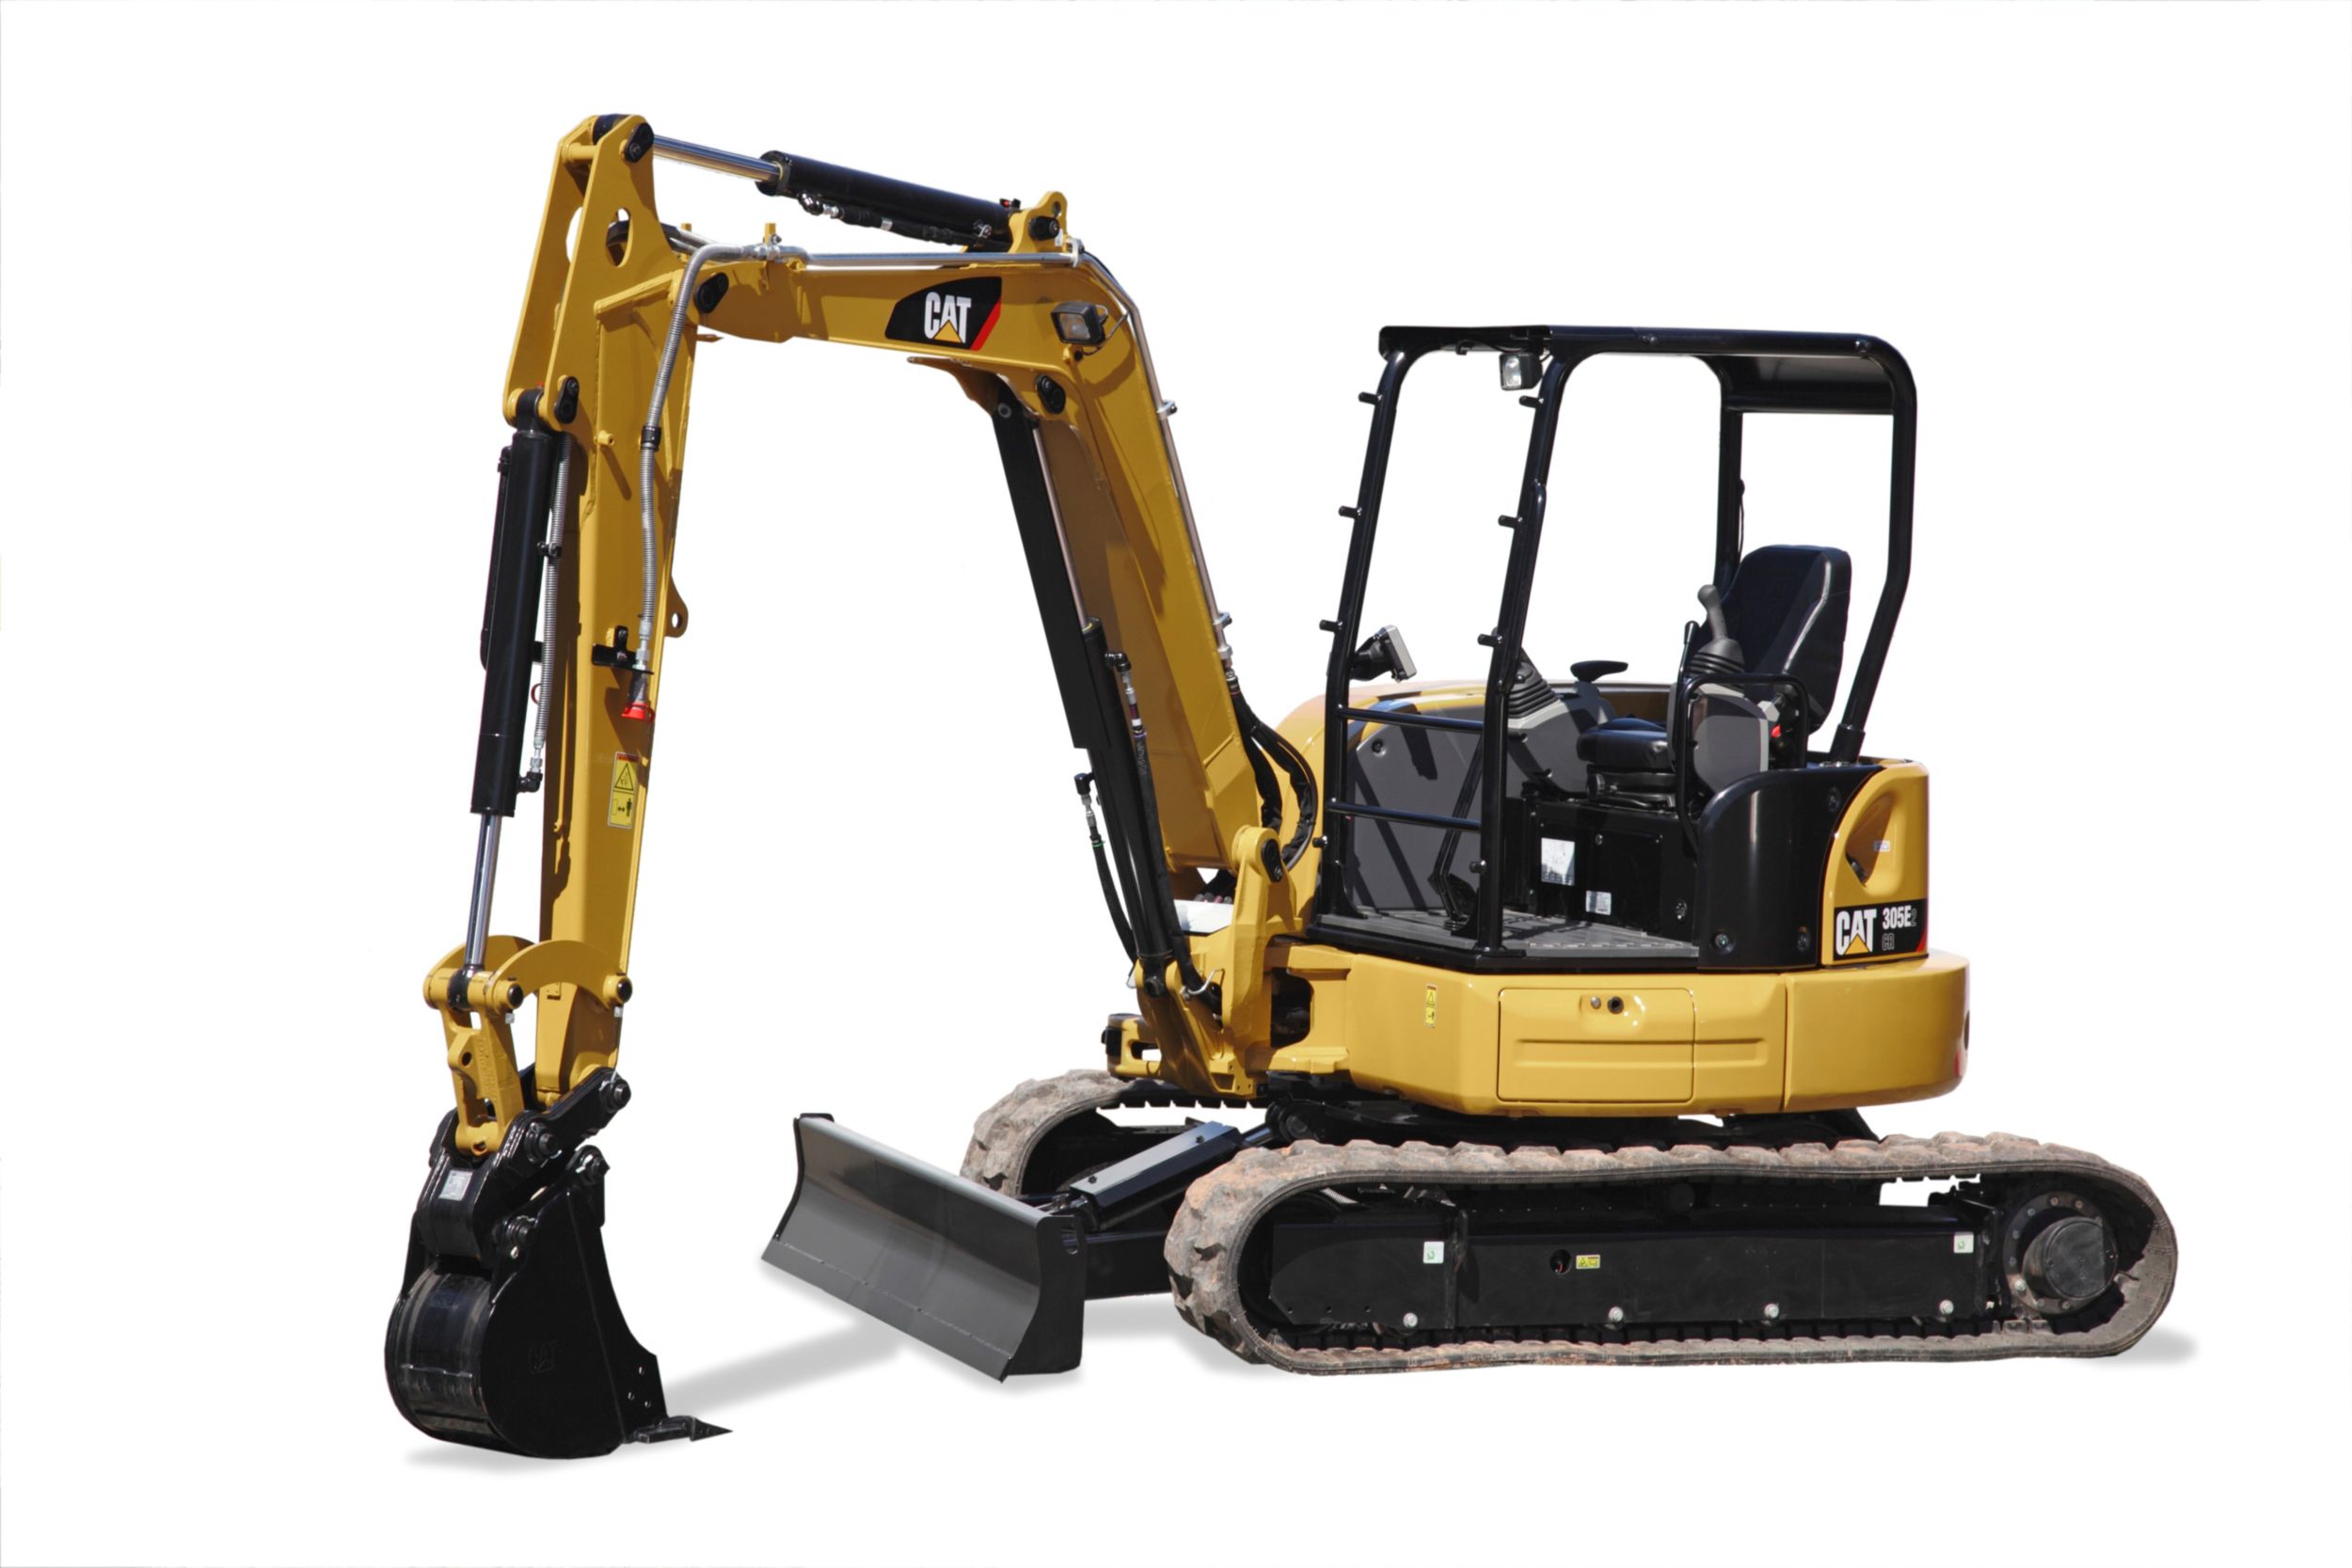 33 Top Pictures Cat 305 Excavator Weight / Small Specalog For Cat 305 5e2 Cr Mini Hydraulic Manualzz